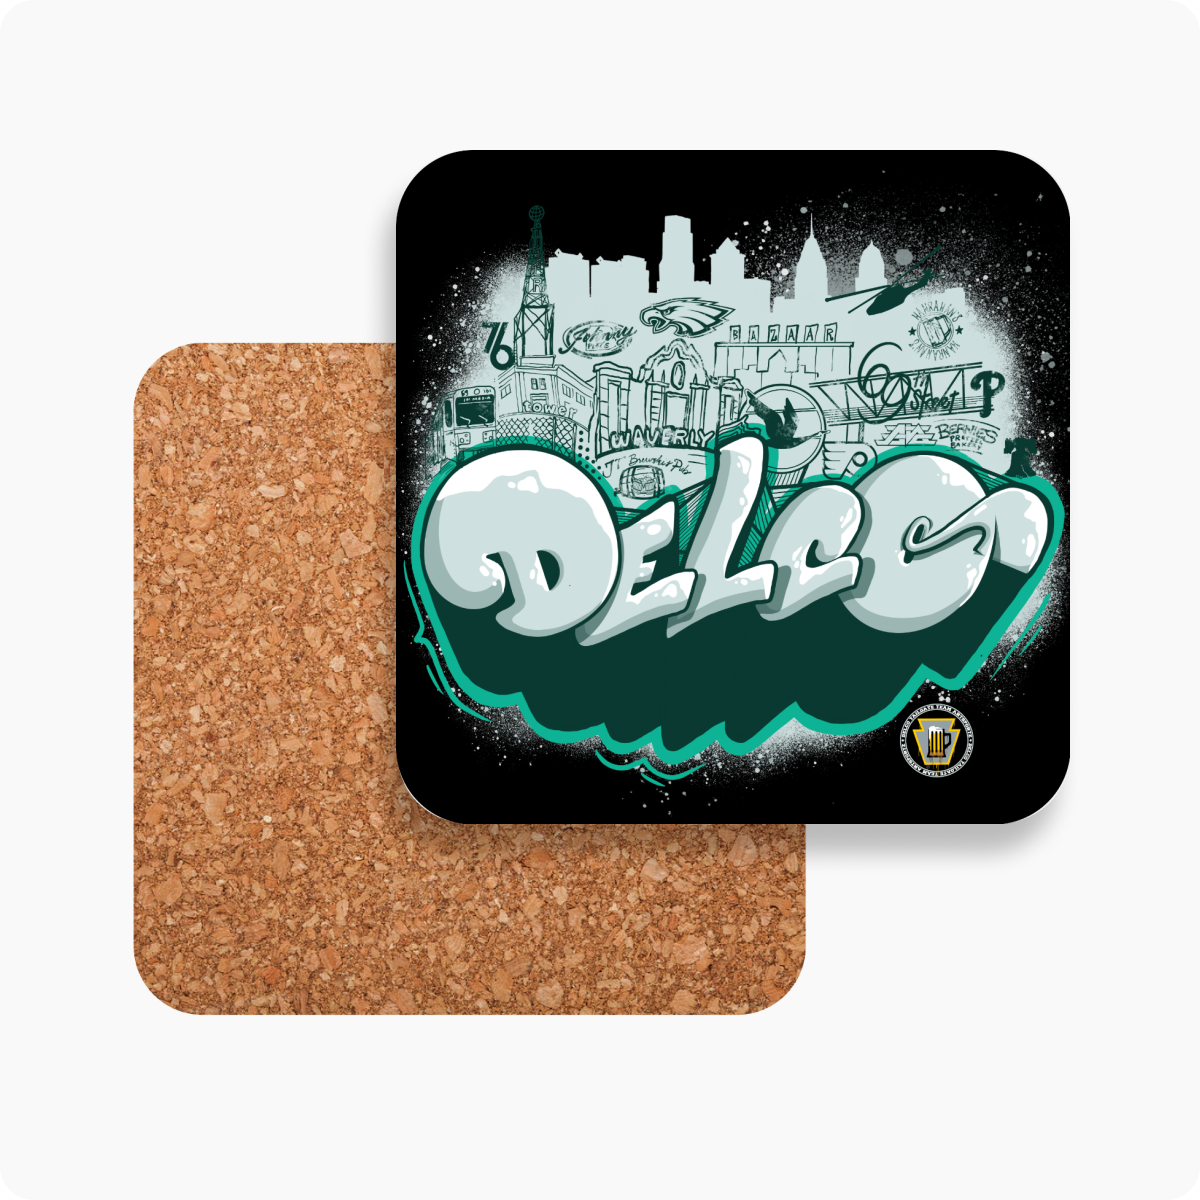 DELCO TAILGATE TOUR Cork and hardwood coasters